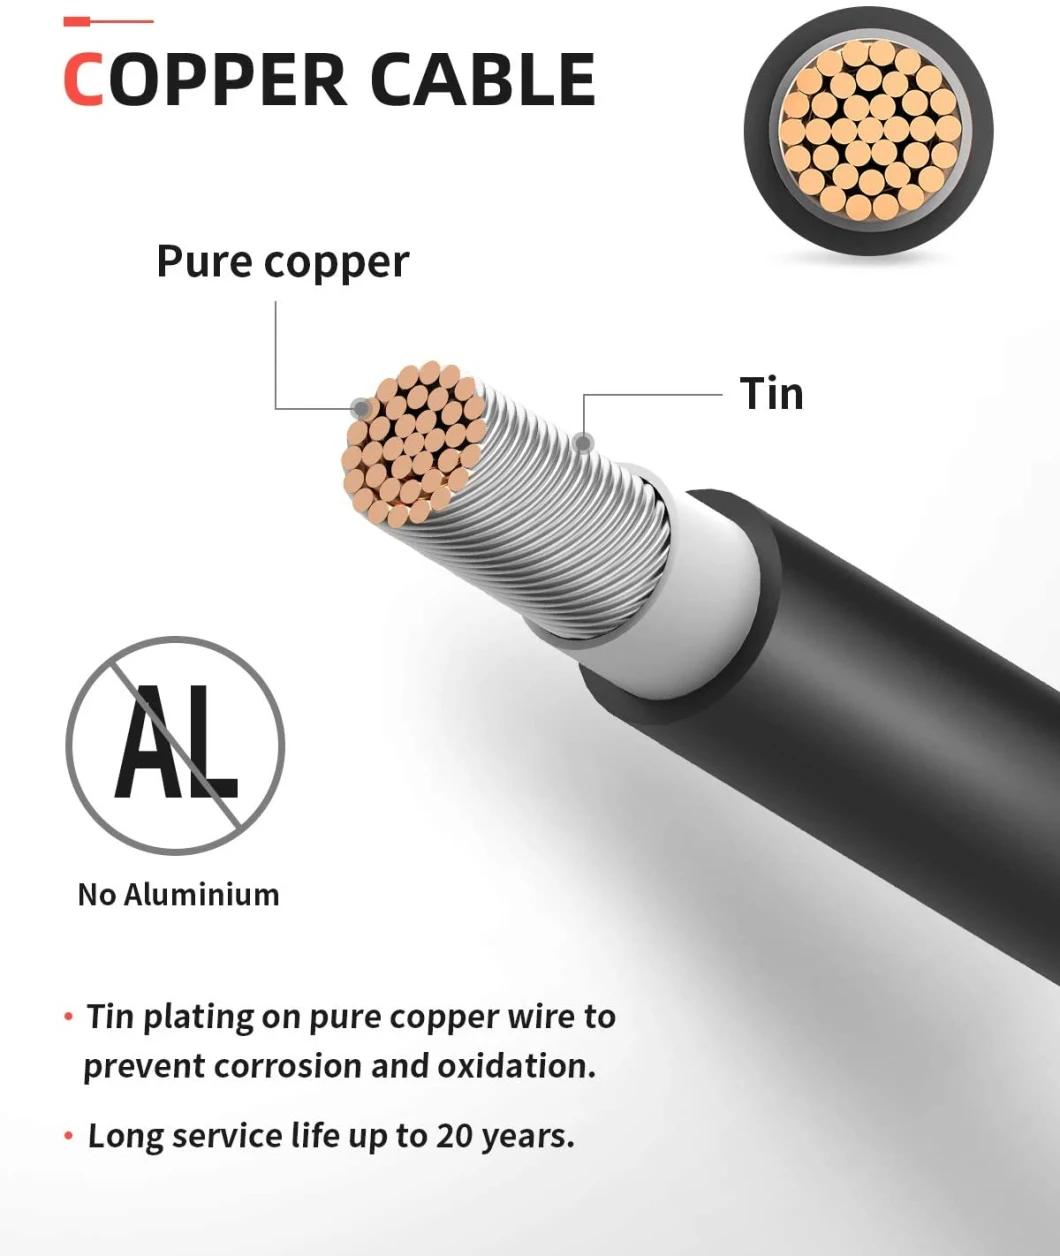 Silicon Rubber Insulationpu-Elastomer Sheathed Twist-Resistant Cold-Resistant Flexible Cable for Wind Turbine